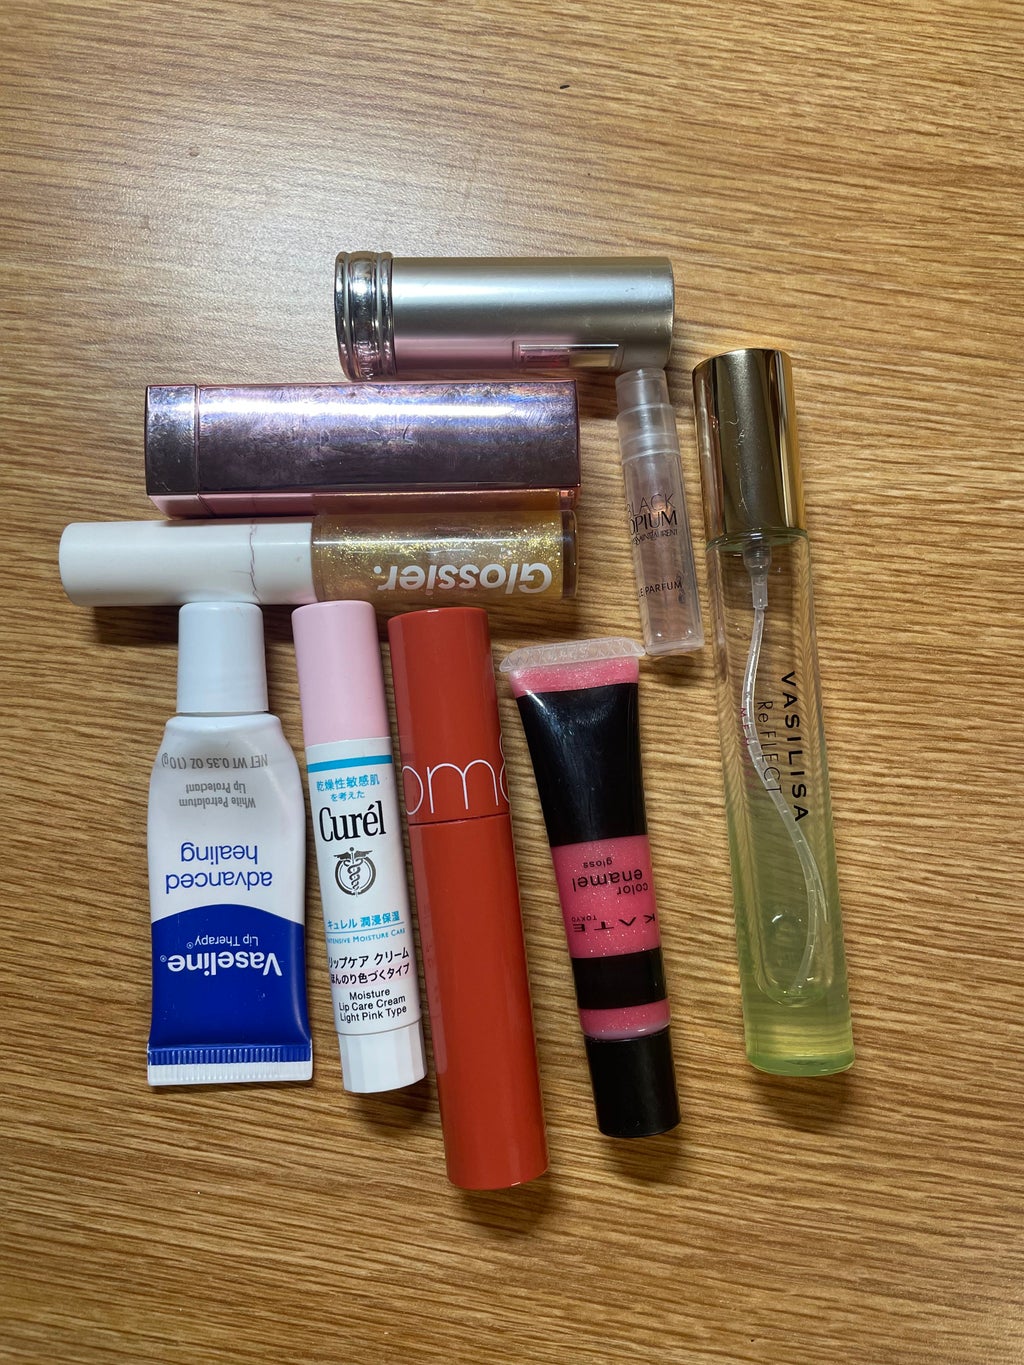 Beauty products in my bag